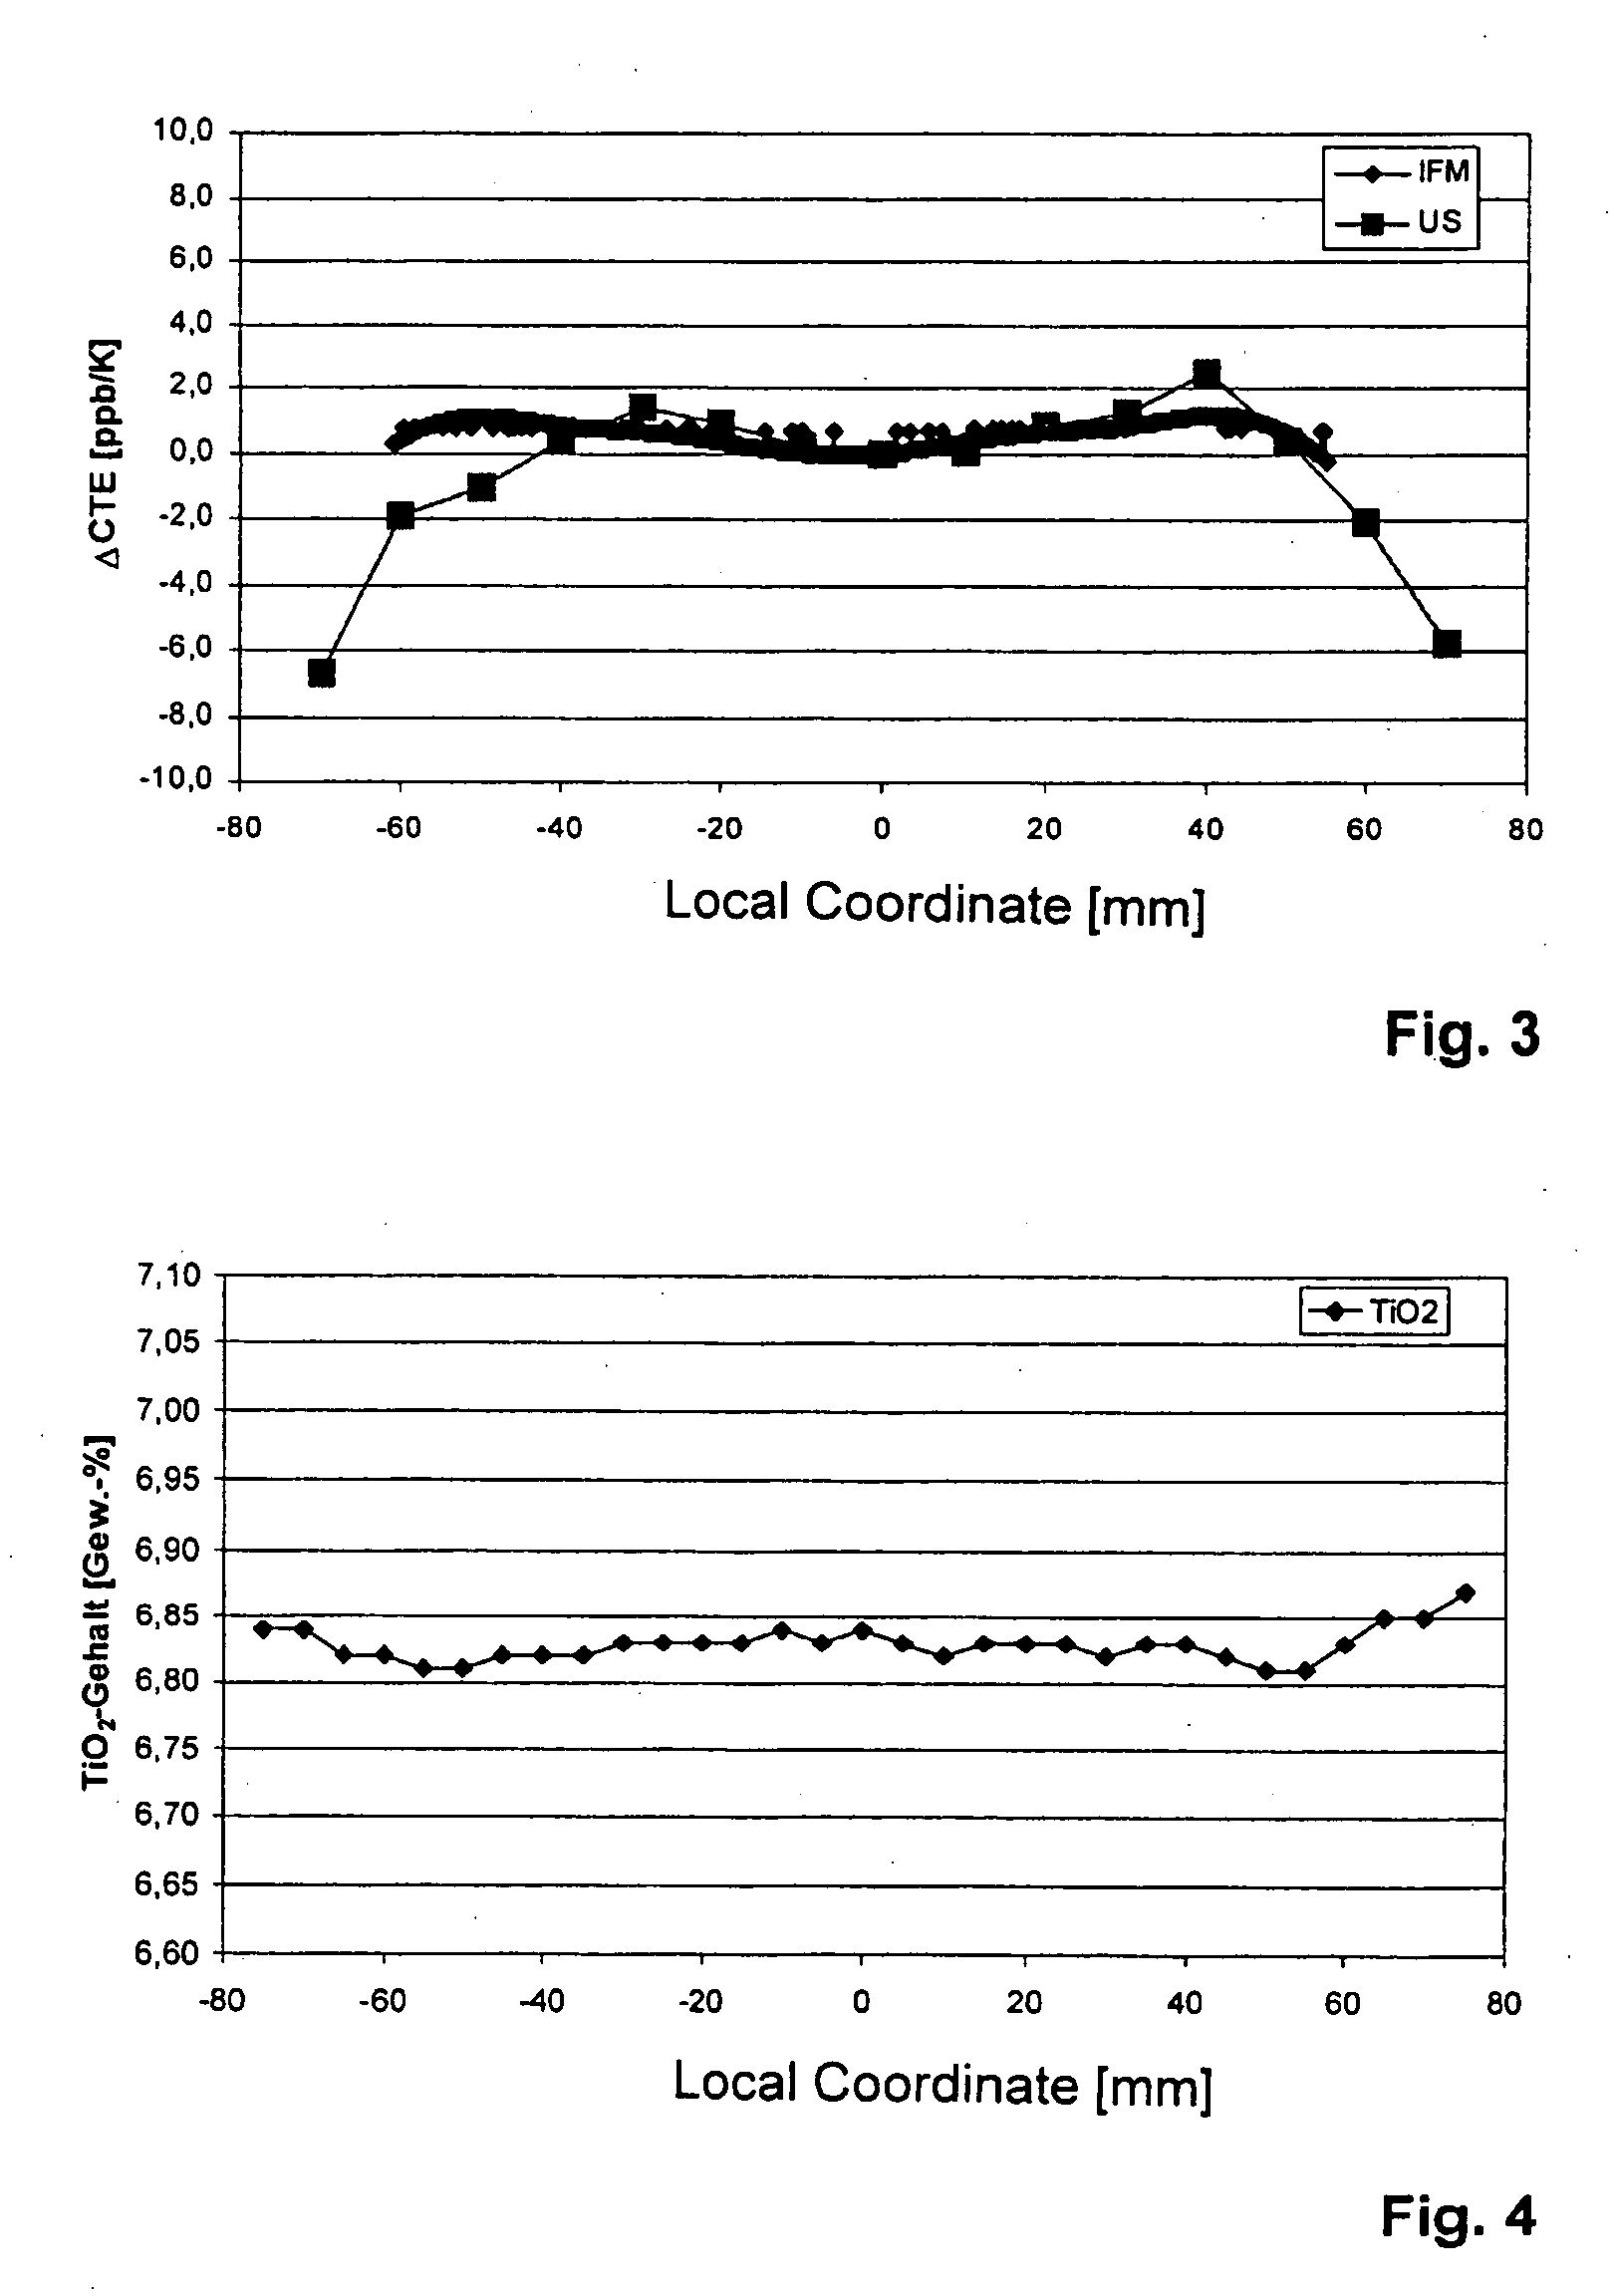 SiO2-TiO2 glass body with improved resistance to radiation